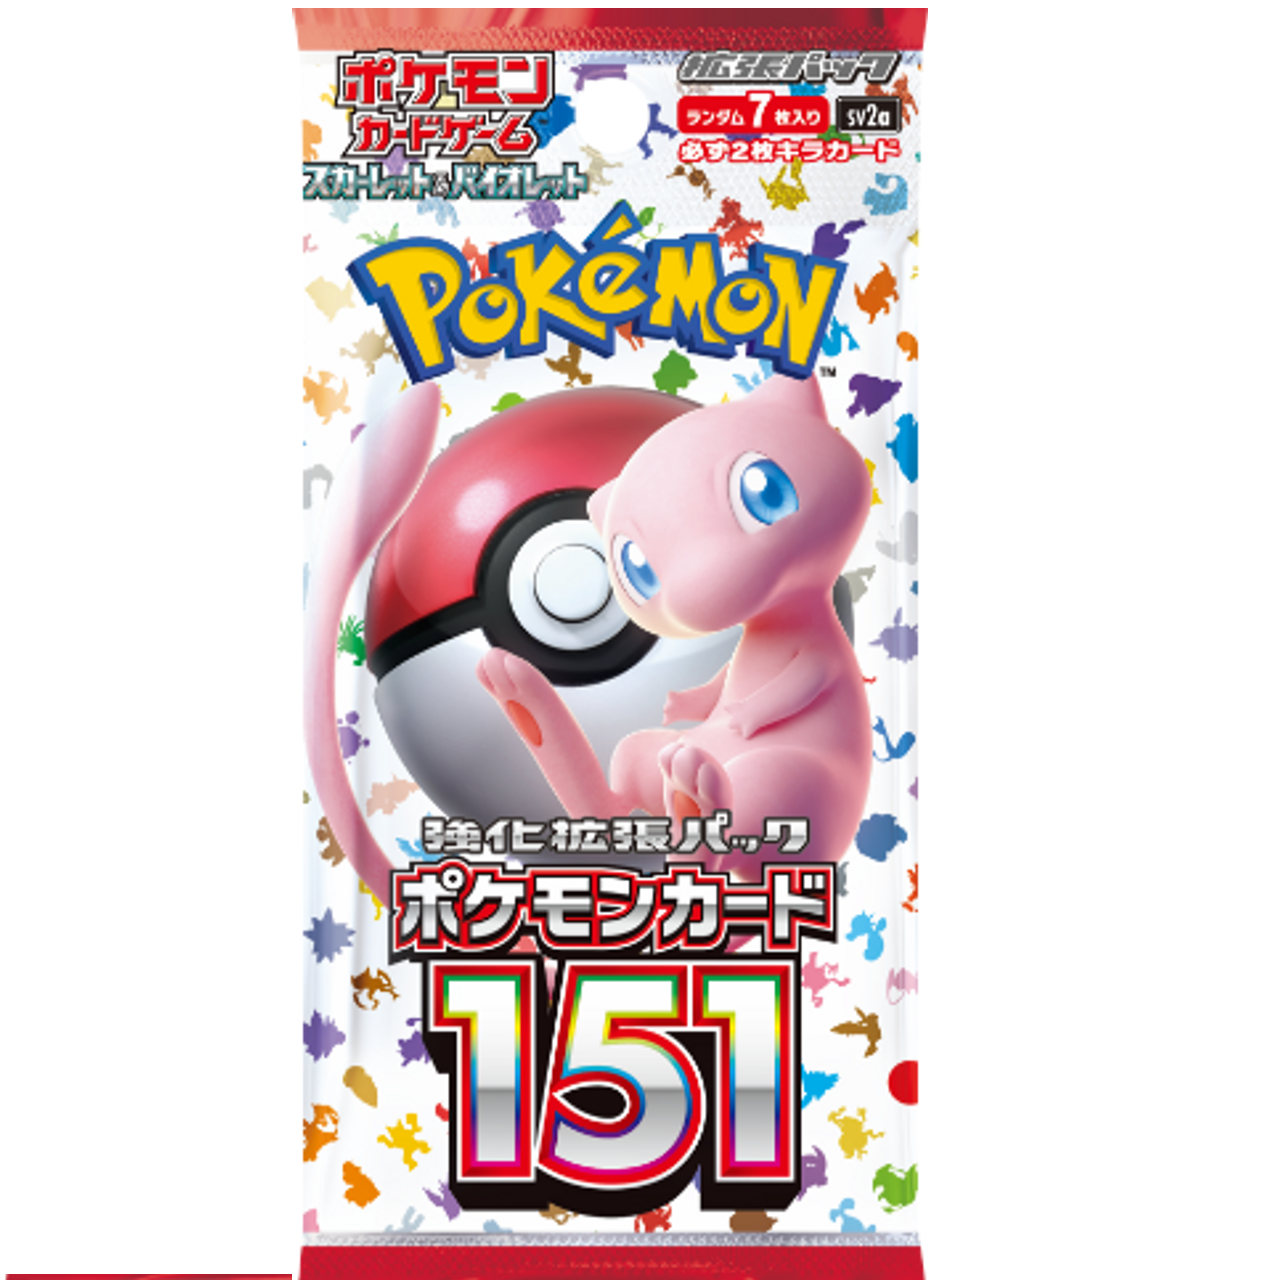 Pokemon Card Game SV2a - 151 Booster Pack